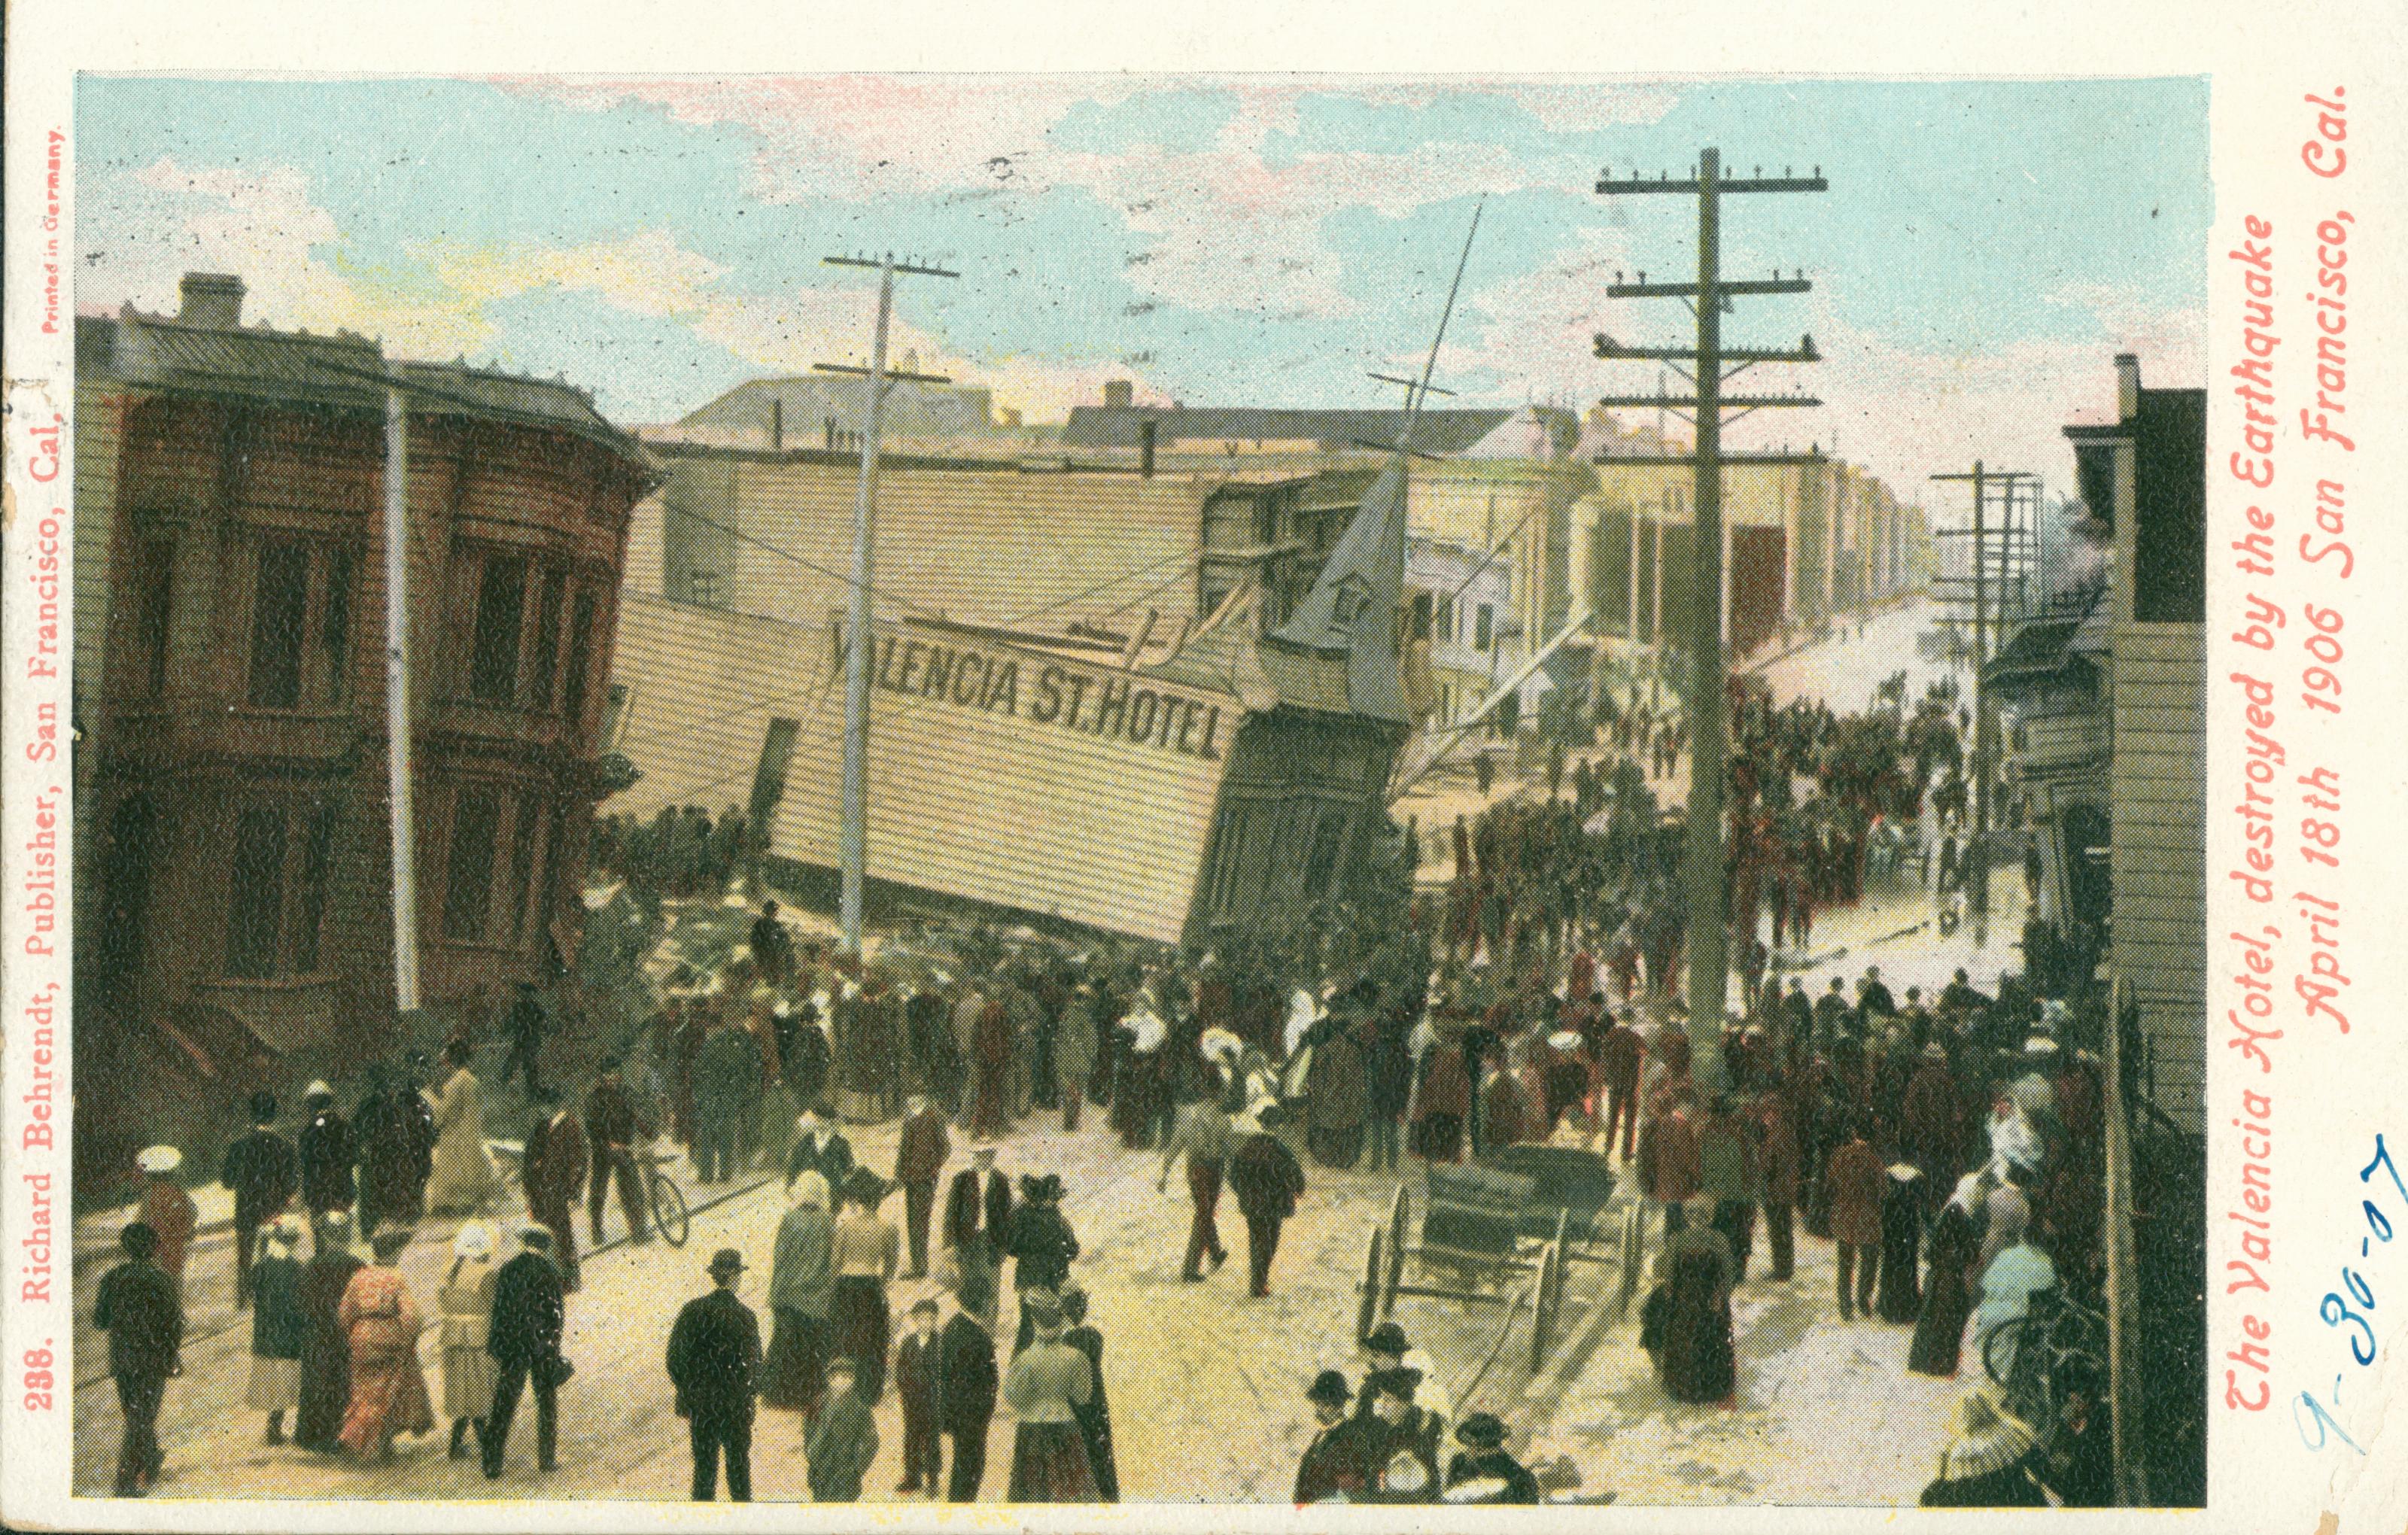 Shows the Valencia Street hotel, collapsing onto the street, surrounded by other buildings and a crowd of spectators